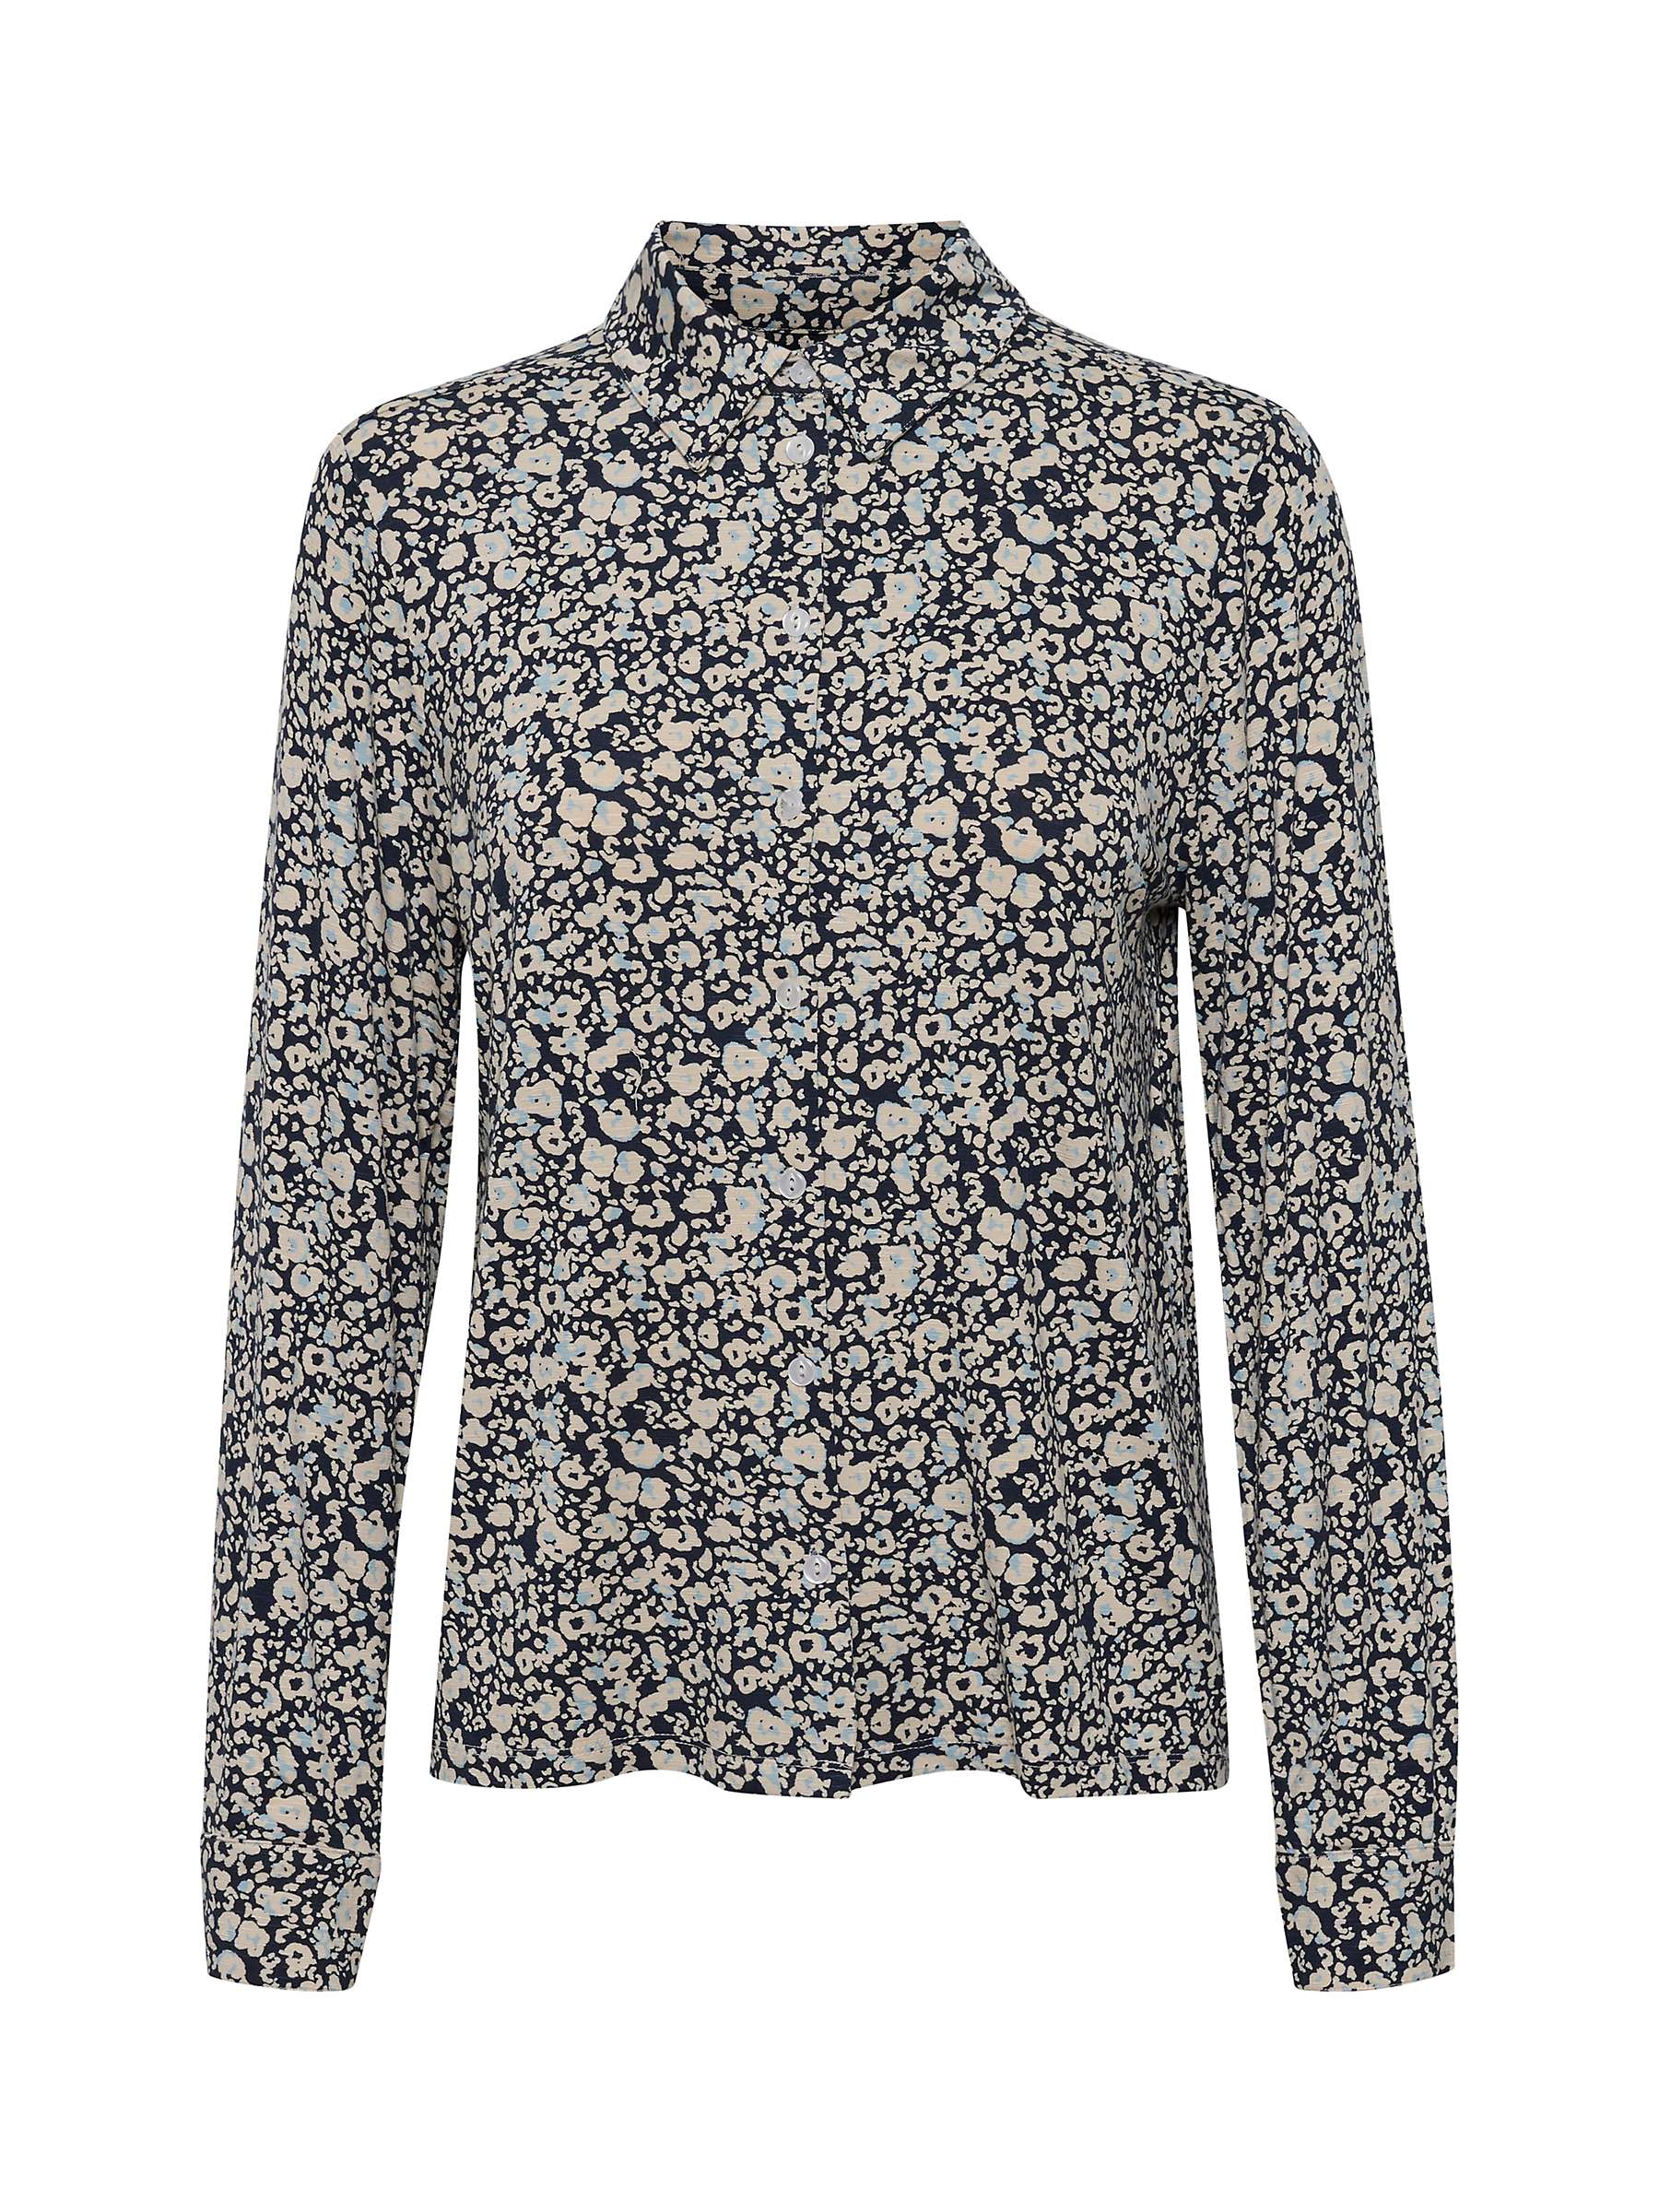 Buy Part Two Sarona Floral Long Sleeve Shirt Online at johnlewis.com